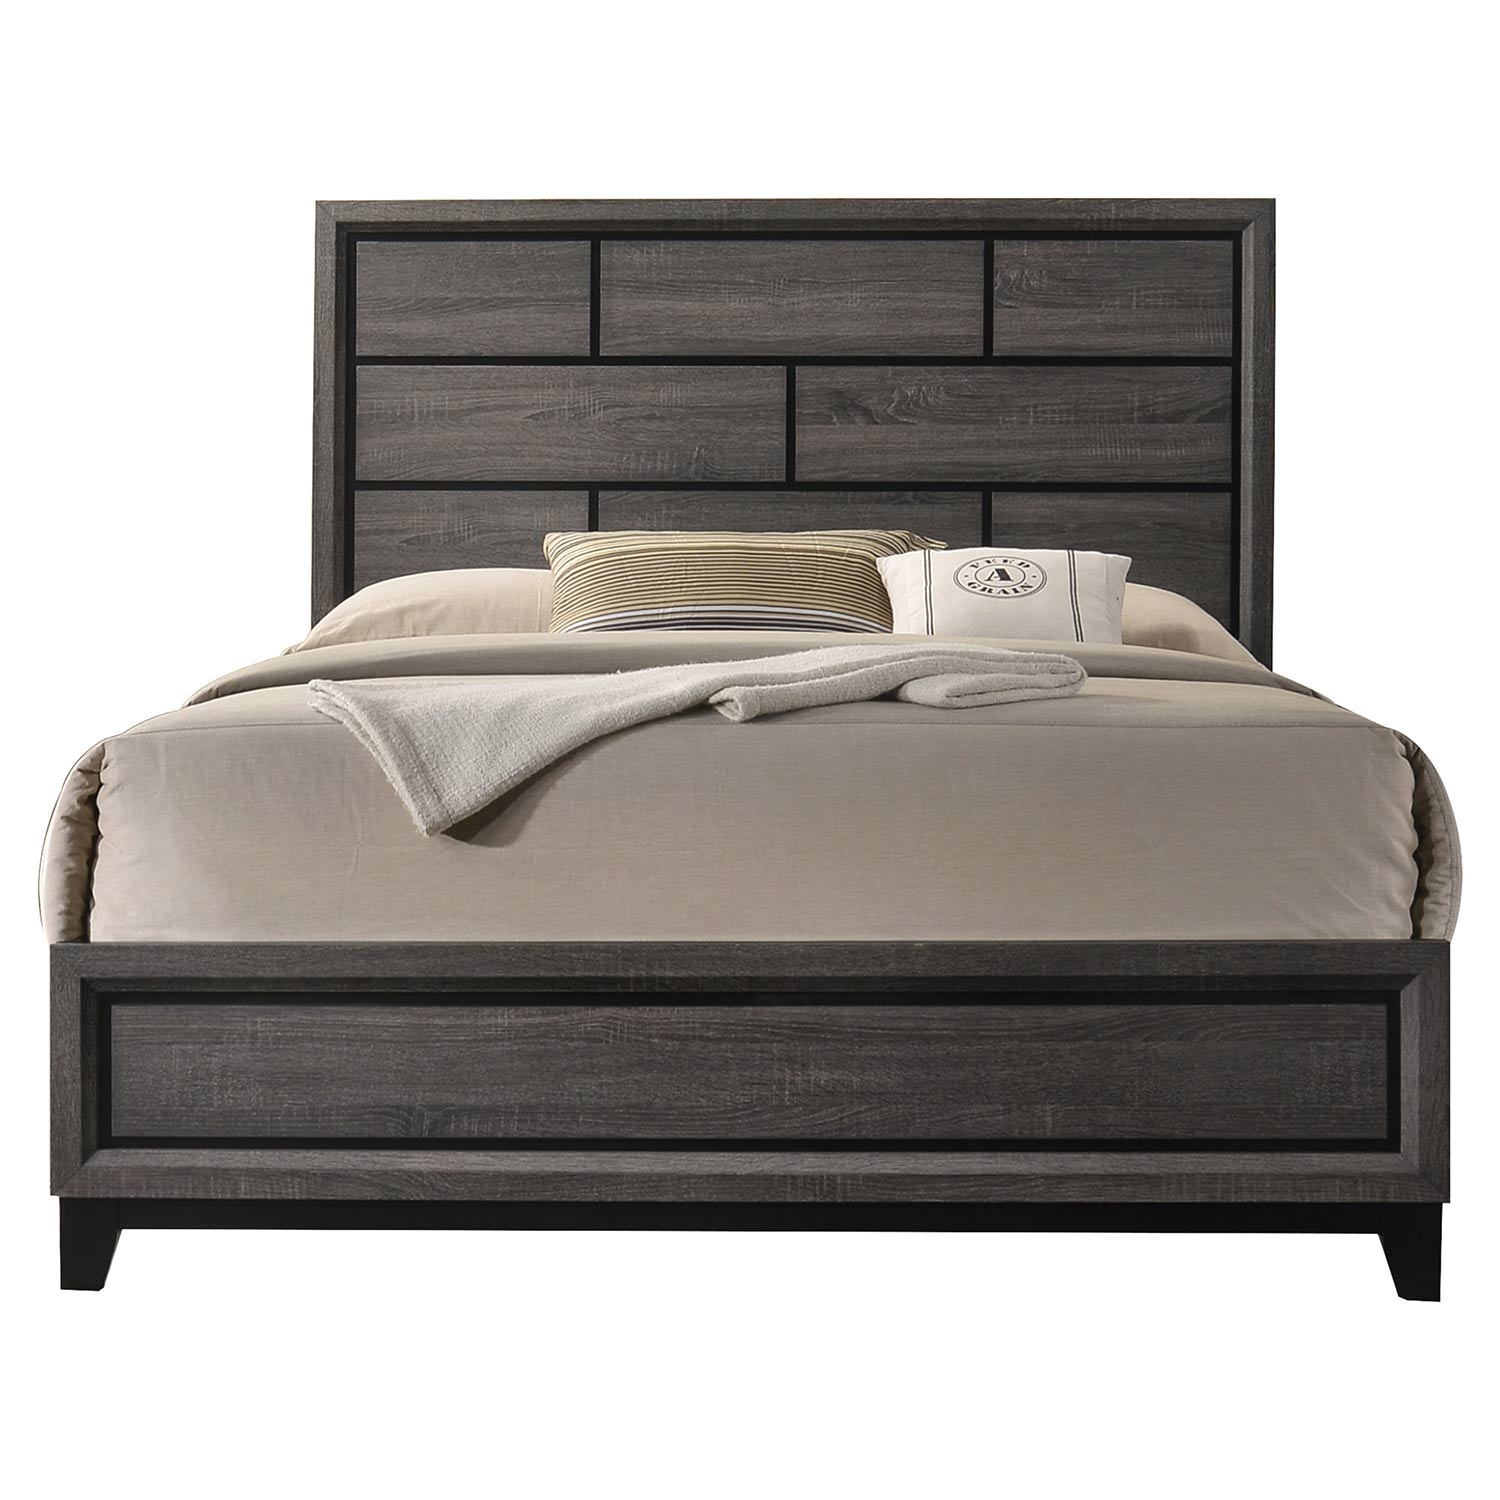 Acme Valdemar Bed - Weathered Gray